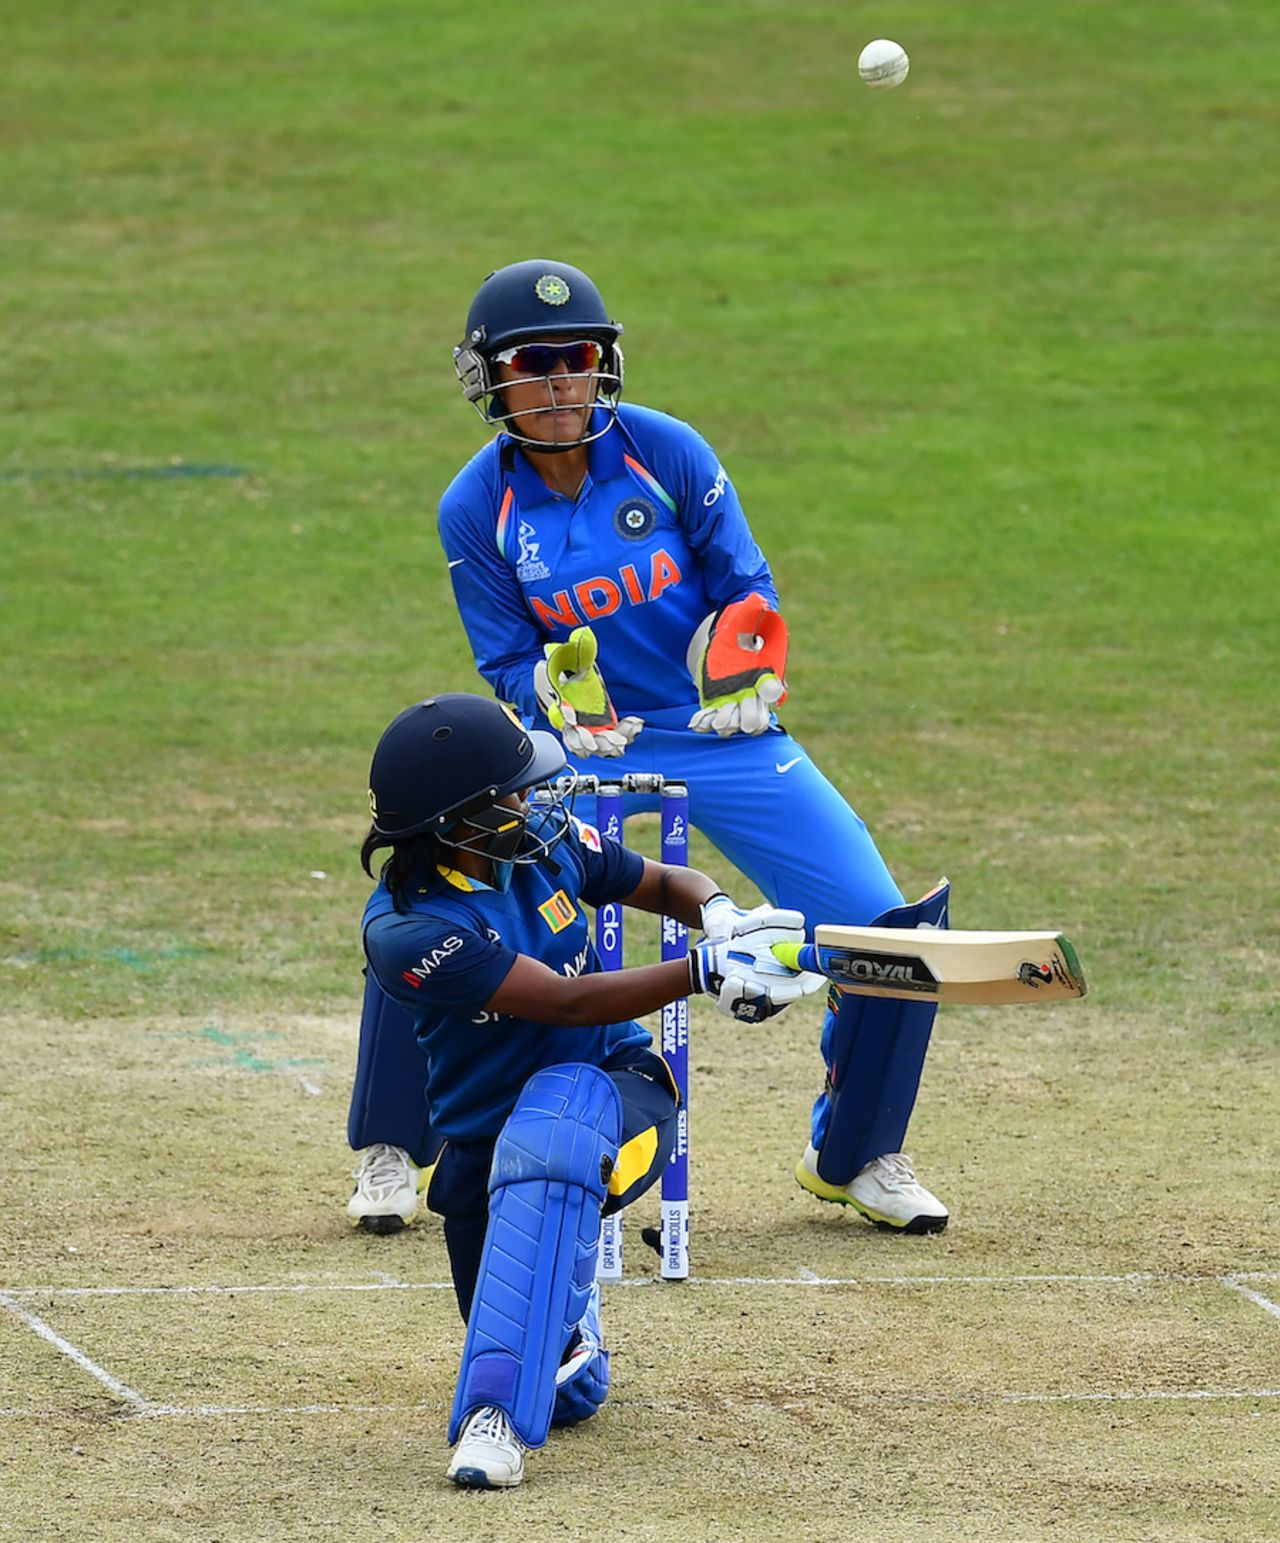 Dilani Manodara used the scoop effectively, India v Sri Lanka, Women's World Cup 2017, Derby, July 5, 2017